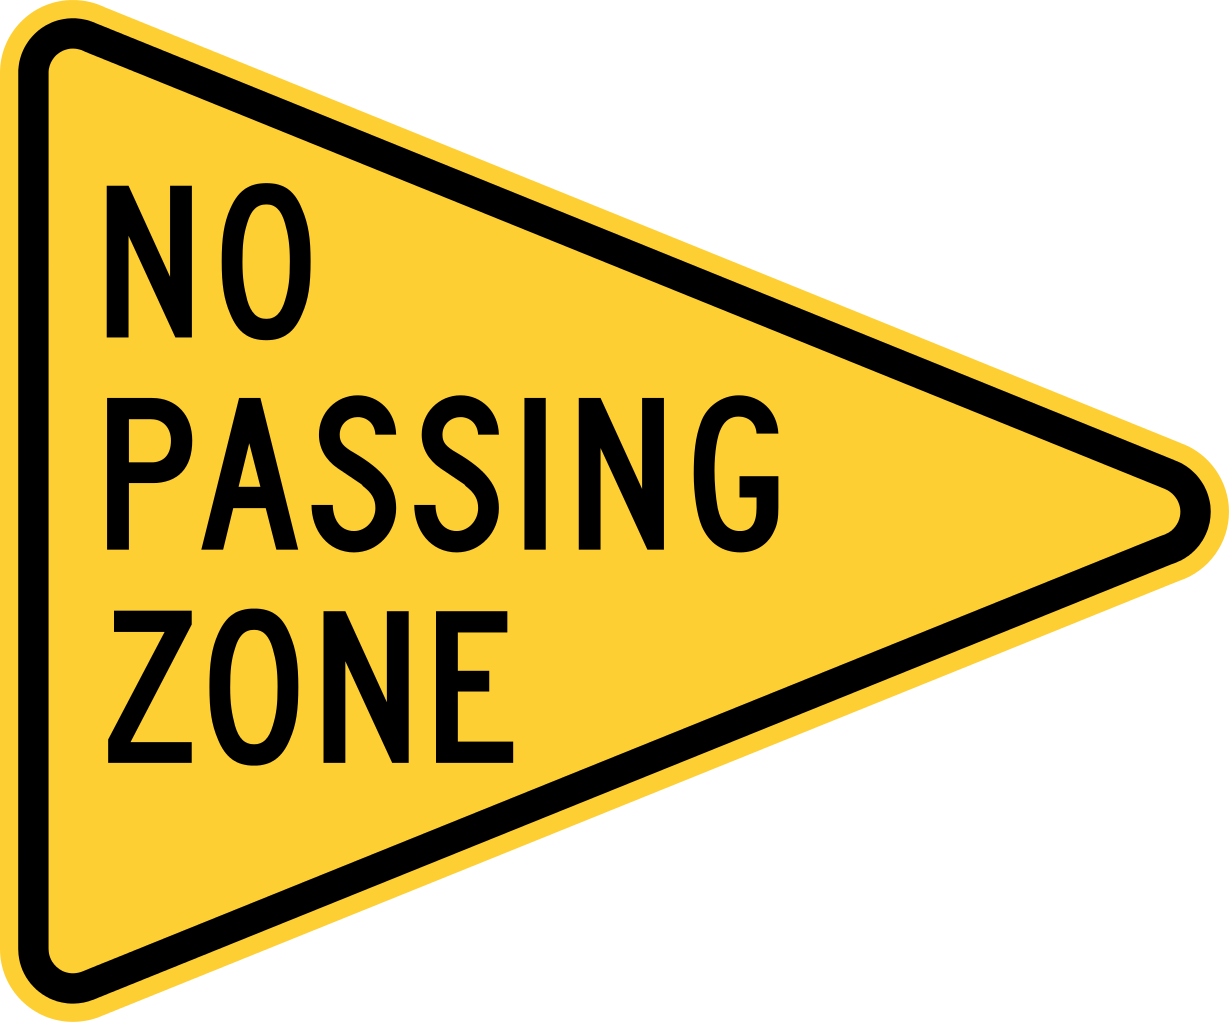 File - Mutcd W14-3 - Svg - No Passing Zone Road Sign (2000x1667)